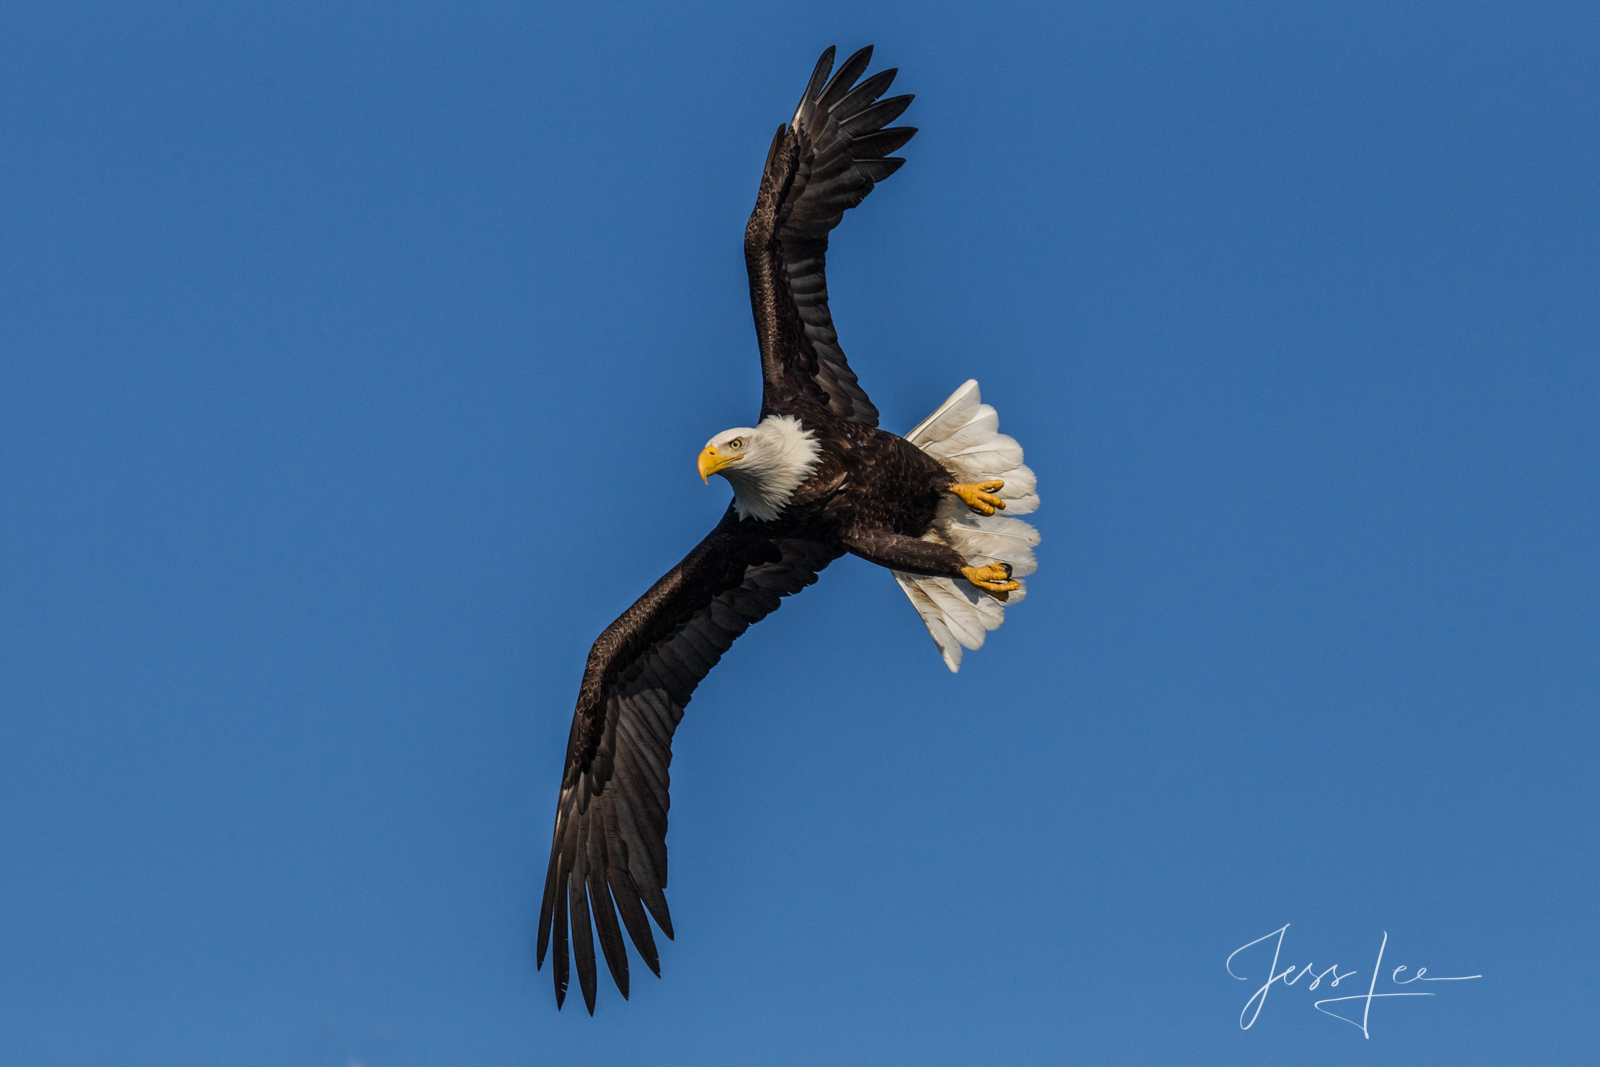 Bring home the power and beauty of the amazing fine art American Bald Eagle photograph Wingover by Jess Lee from his Wildlife...